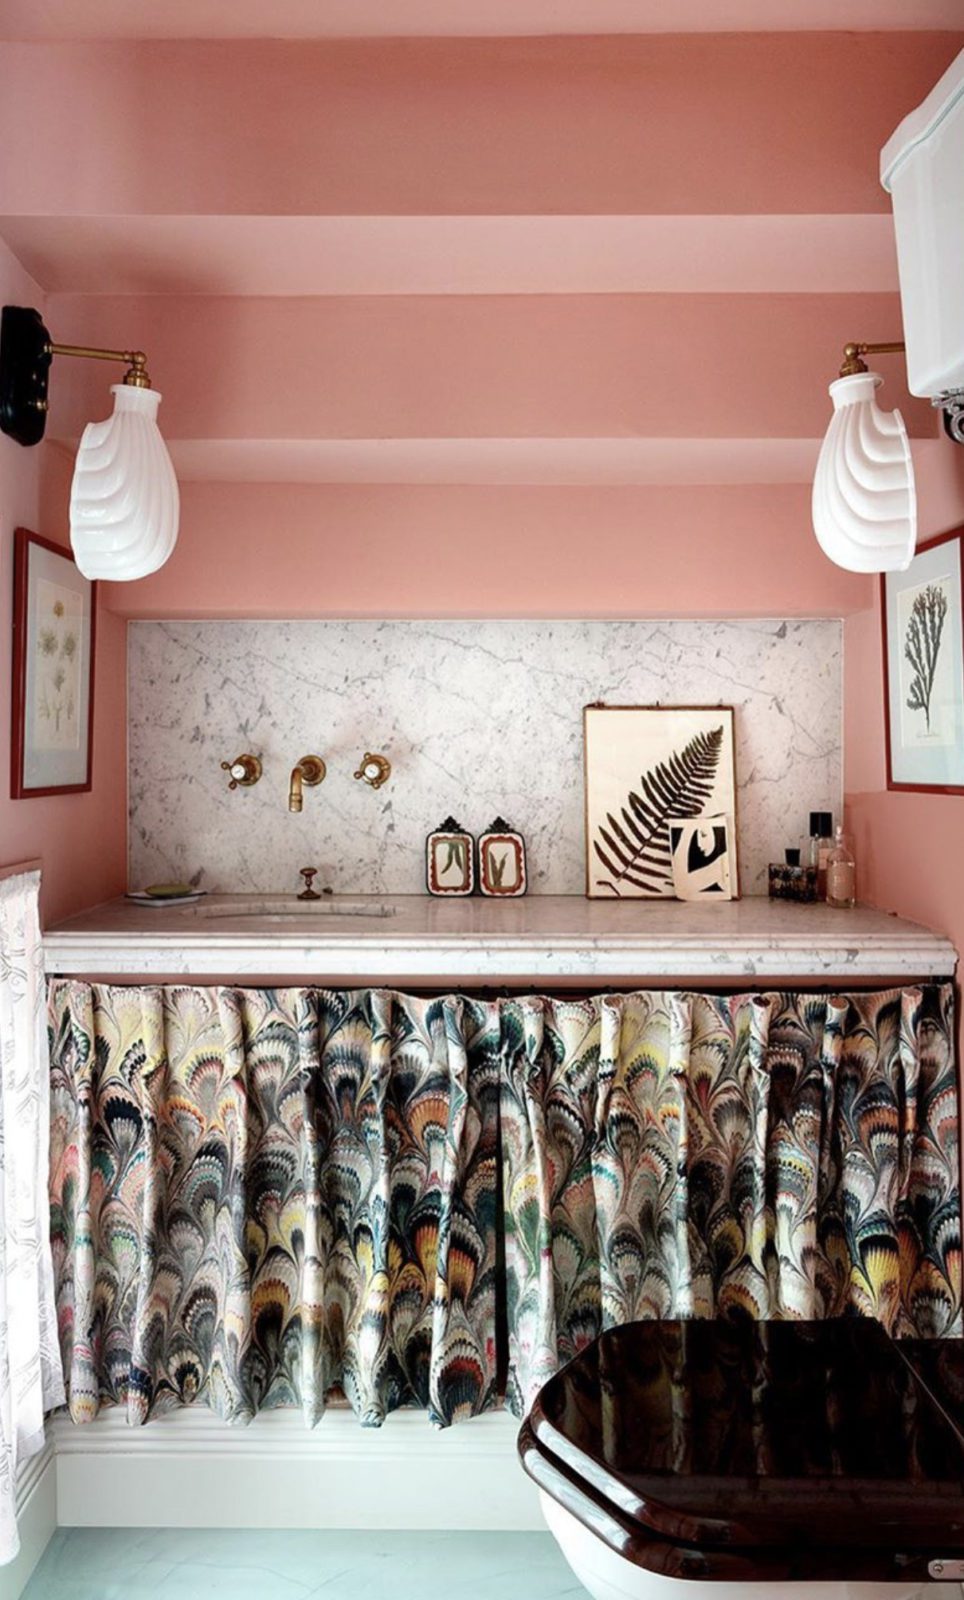 Pink bathroom with marble countertop and backsplash, artwork, and curtain underneath the sink